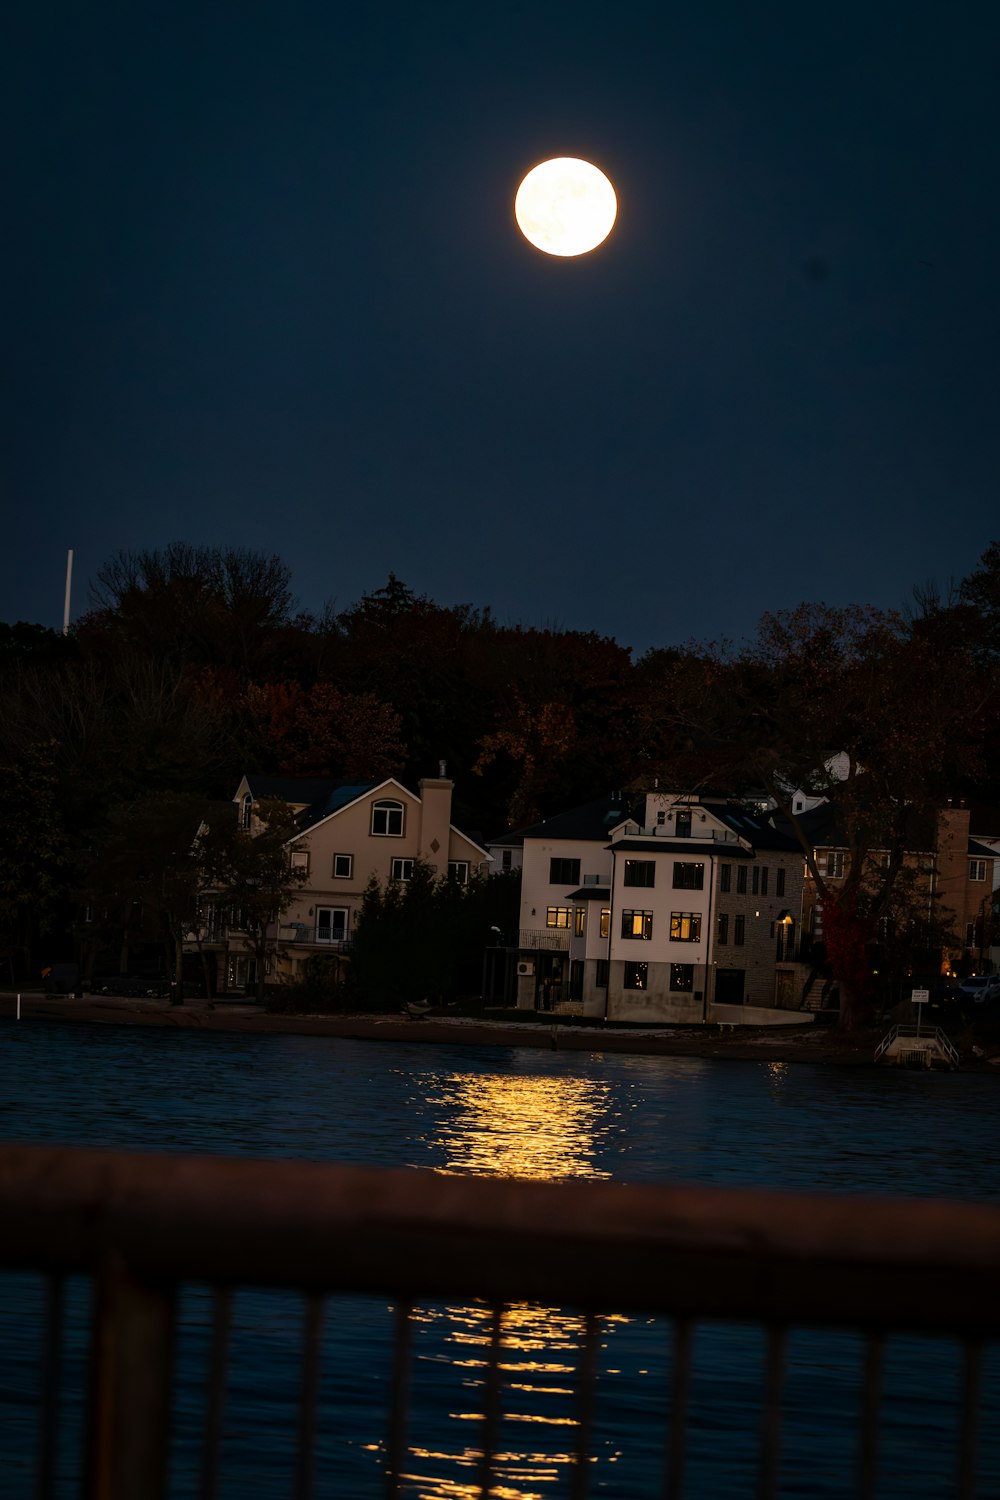 a full moon is seen over a lake at night